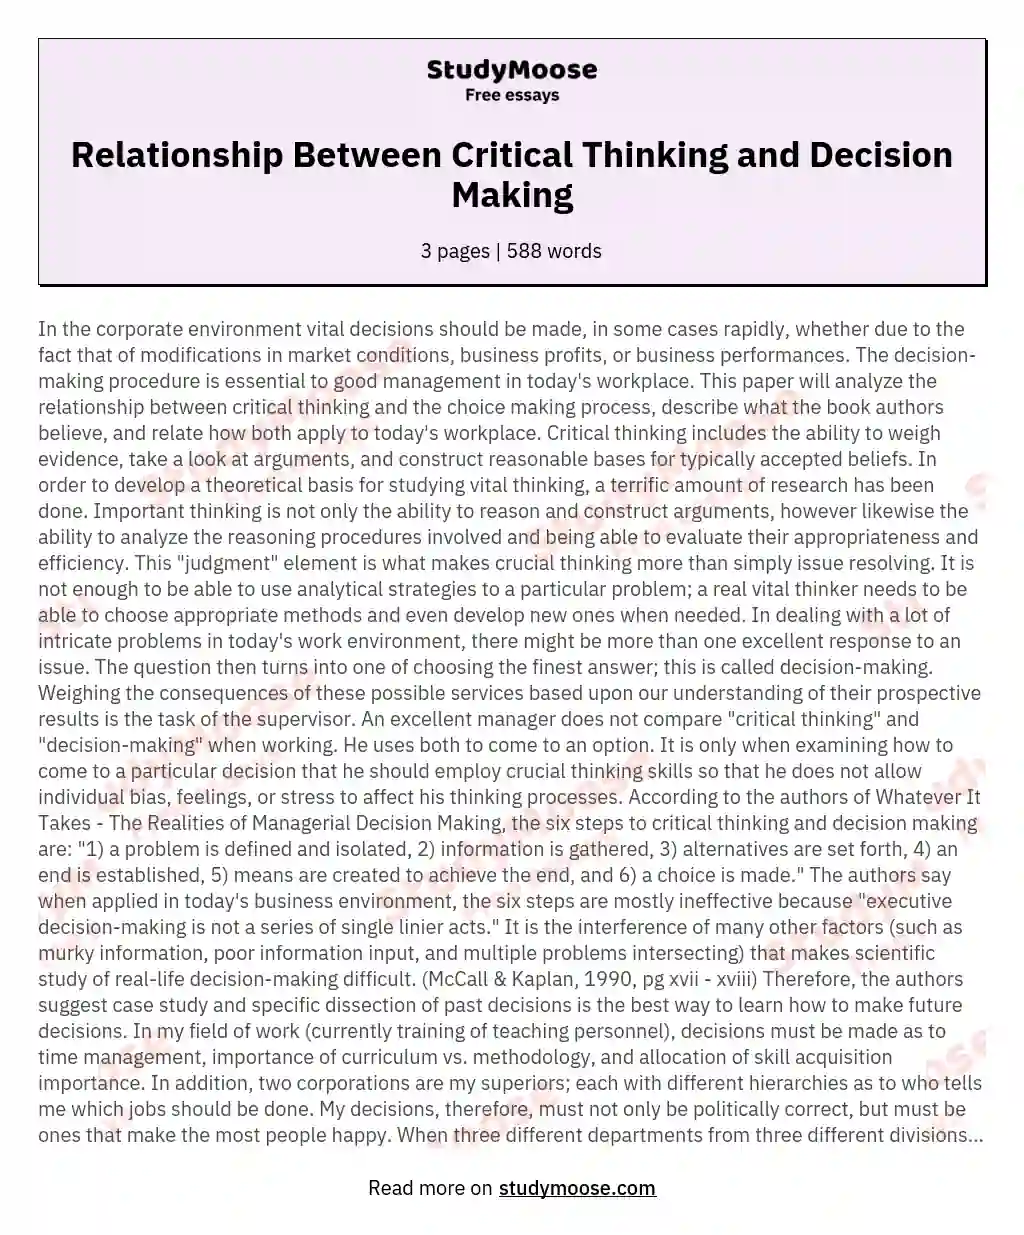 Relationship Between Critical Thinking and Decision Making essay